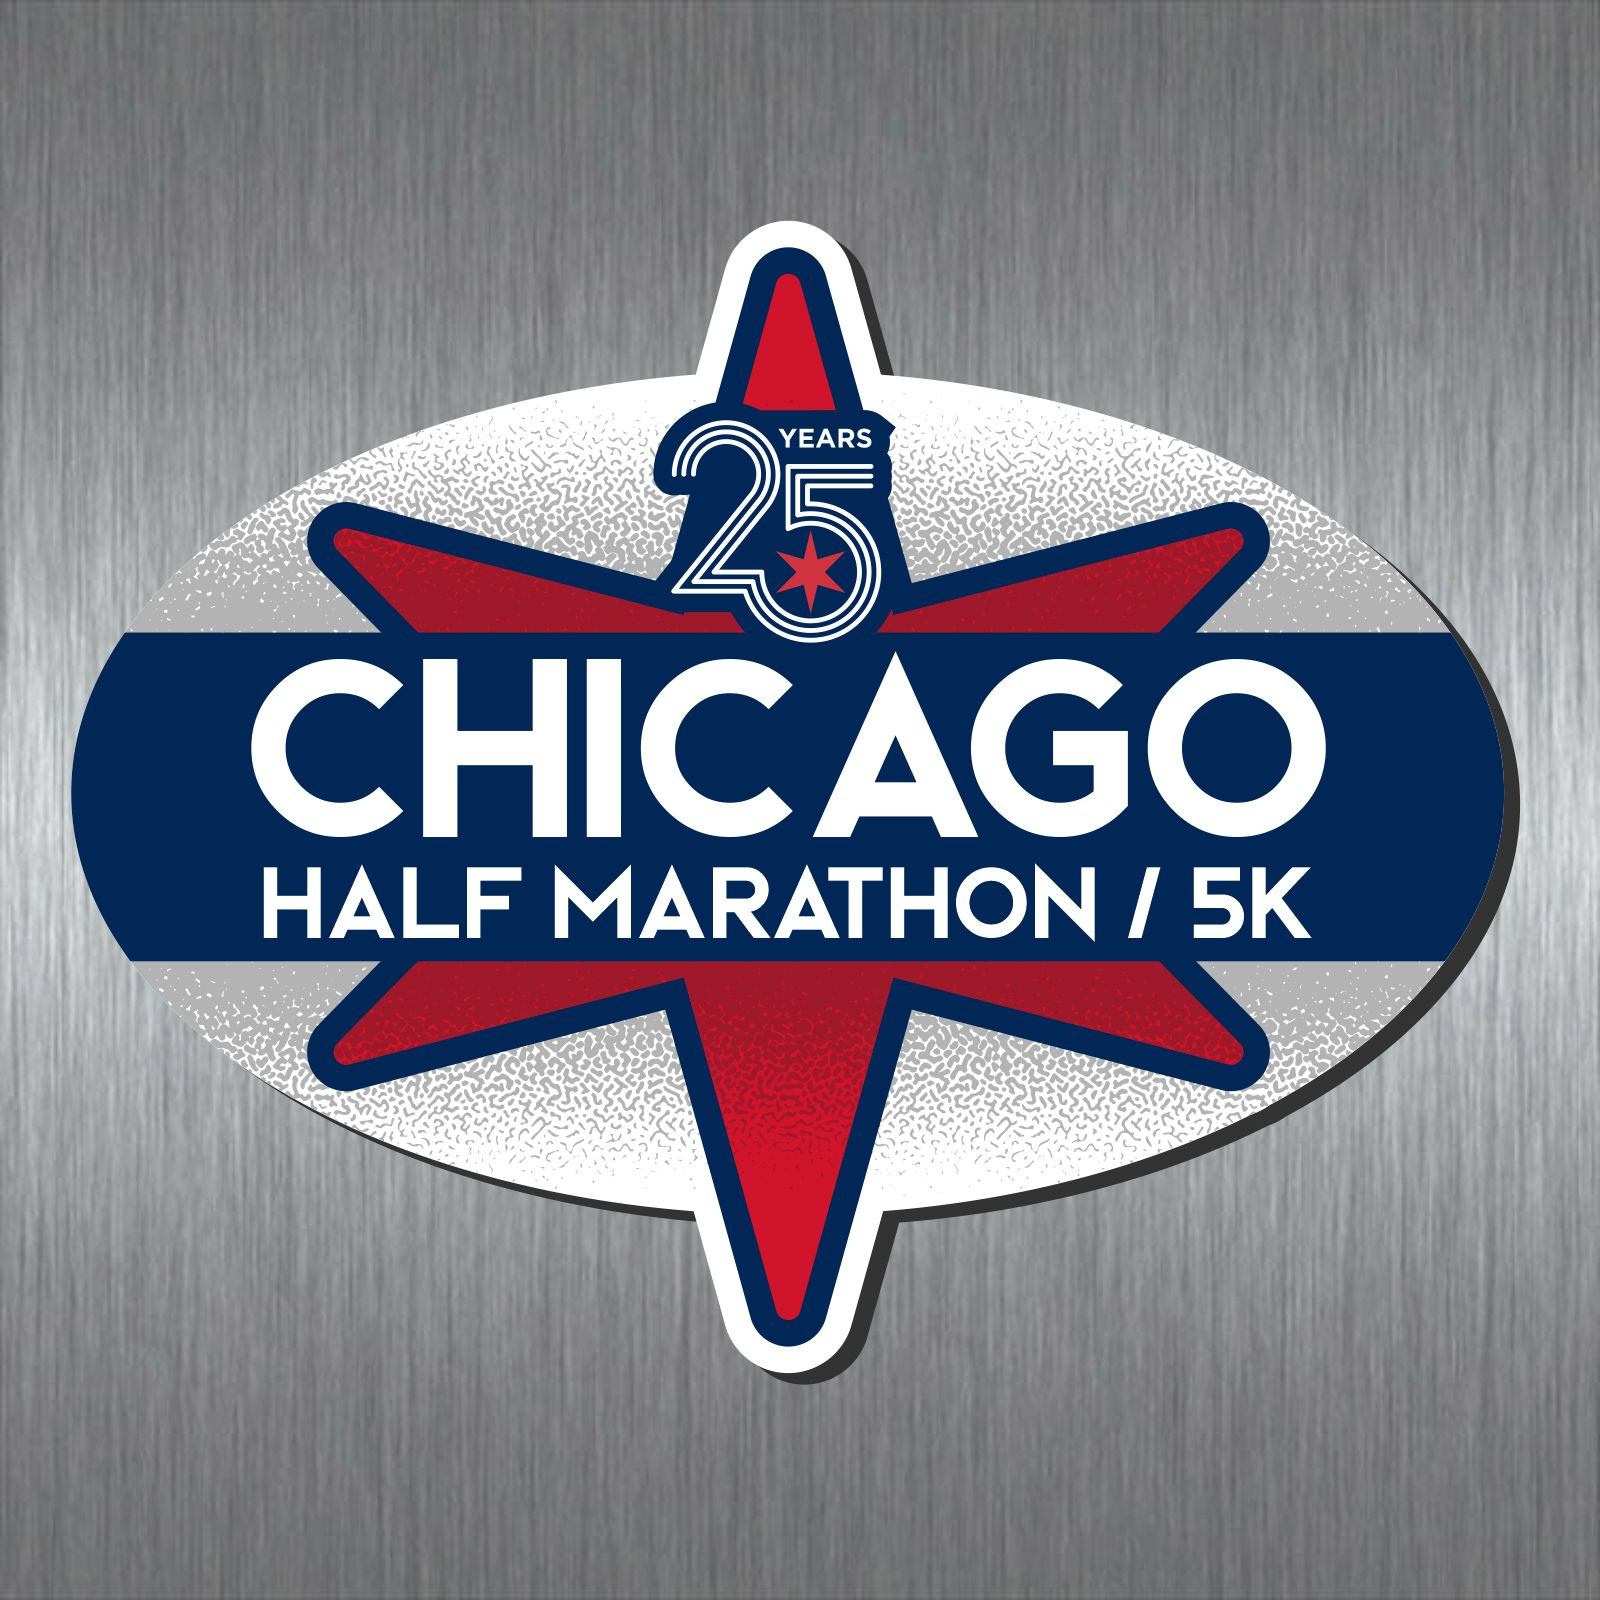 CHI HALF/5K Magnet - Oval 5"x4" - 25 Years